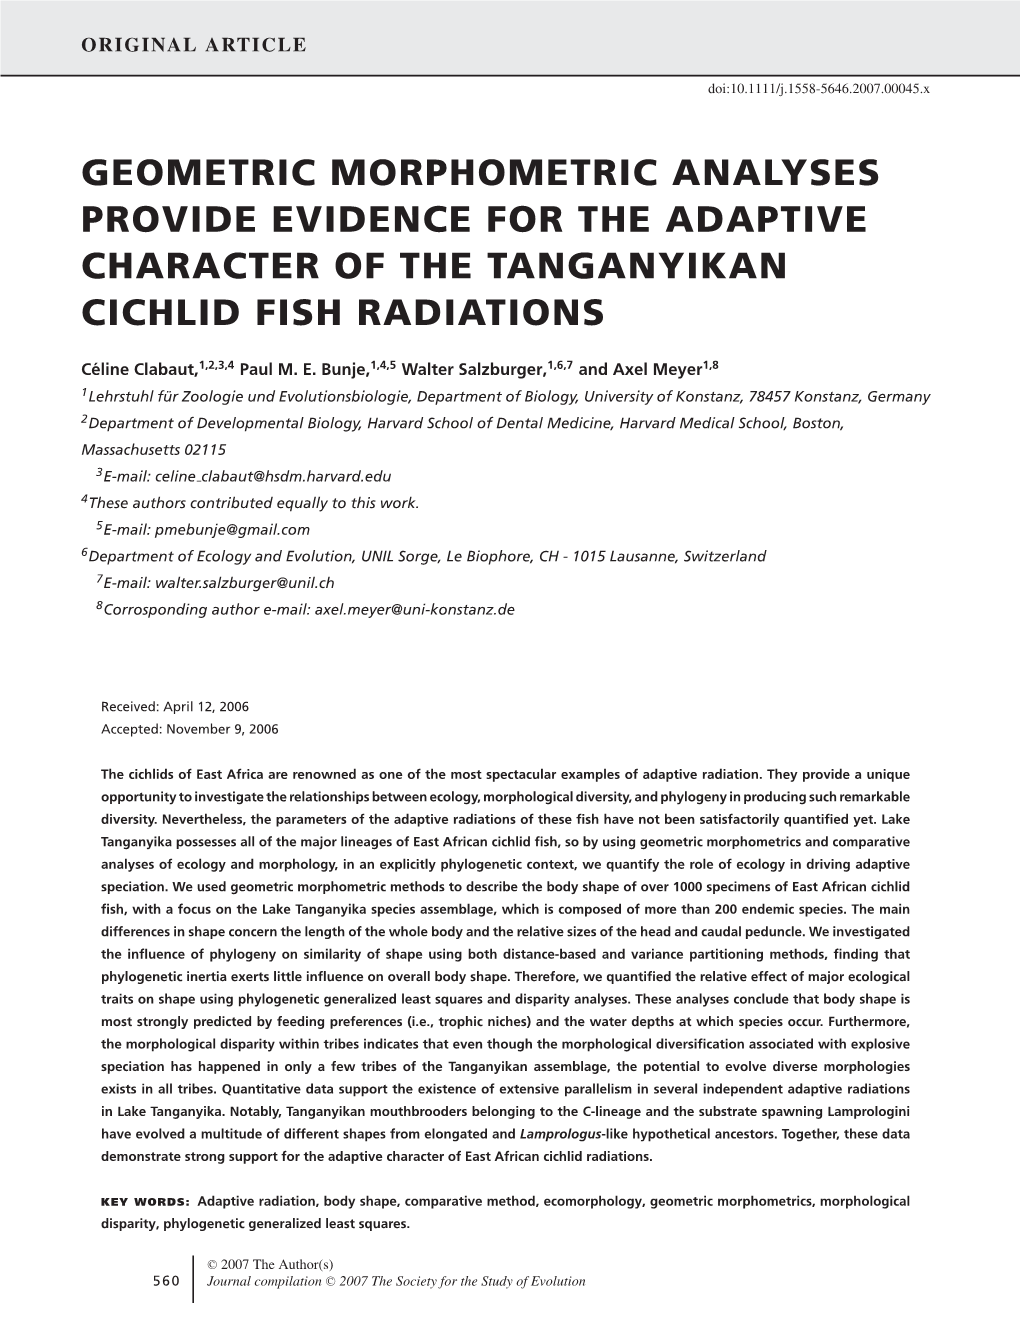 Geometric Morphometric Analyses Provide Evidence for the Adaptive Character of the Tanganyikan Cichlid Fish Radiations